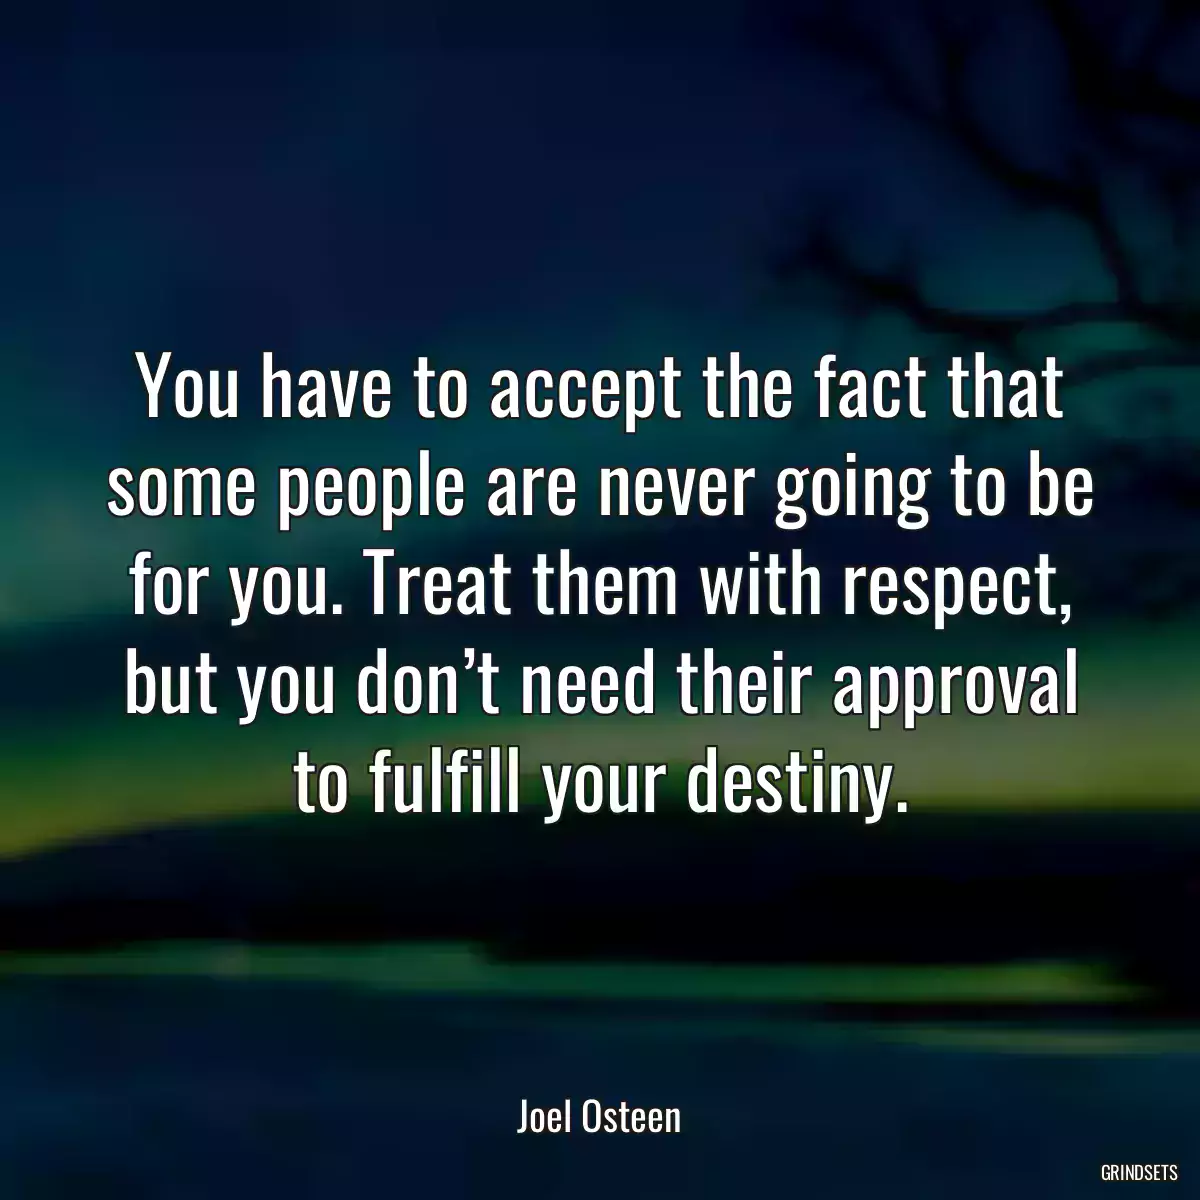 You have to accept the fact that some people are never going to be for you. Treat them with respect, but you don’t need their approval to fulfill your destiny.